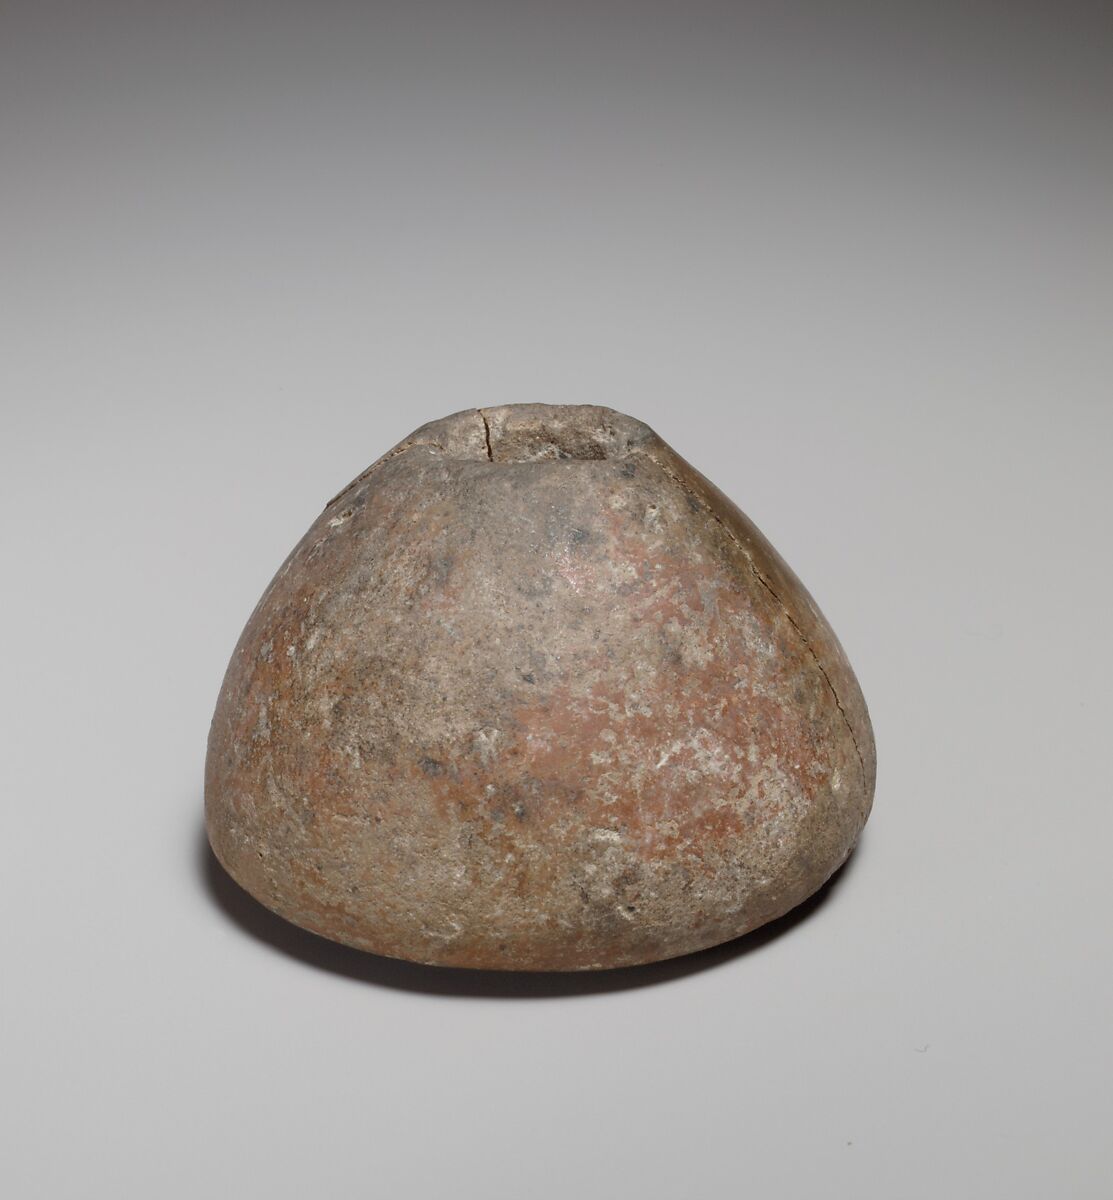 Conical-hemispherical spindle-whorl with flat base, Terracotta, Cypriot 